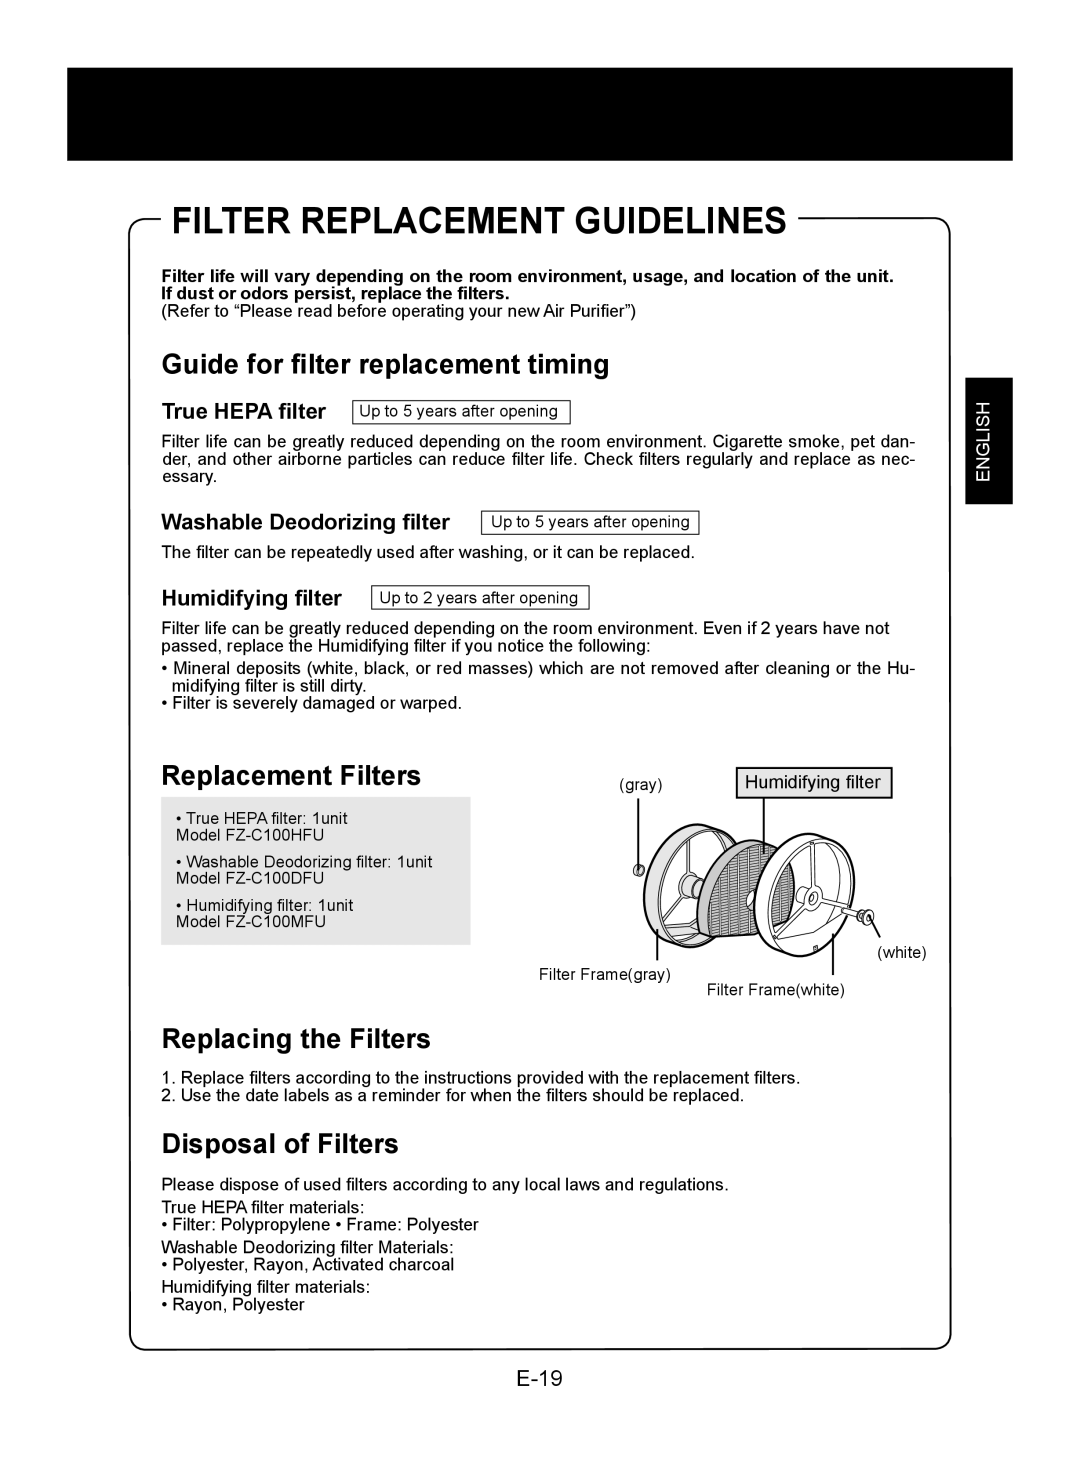 Sharp KC-850U Filter Replacement Guidelines, Guide for filter replacement timing, Replacement Filters, Disposal of Filters 